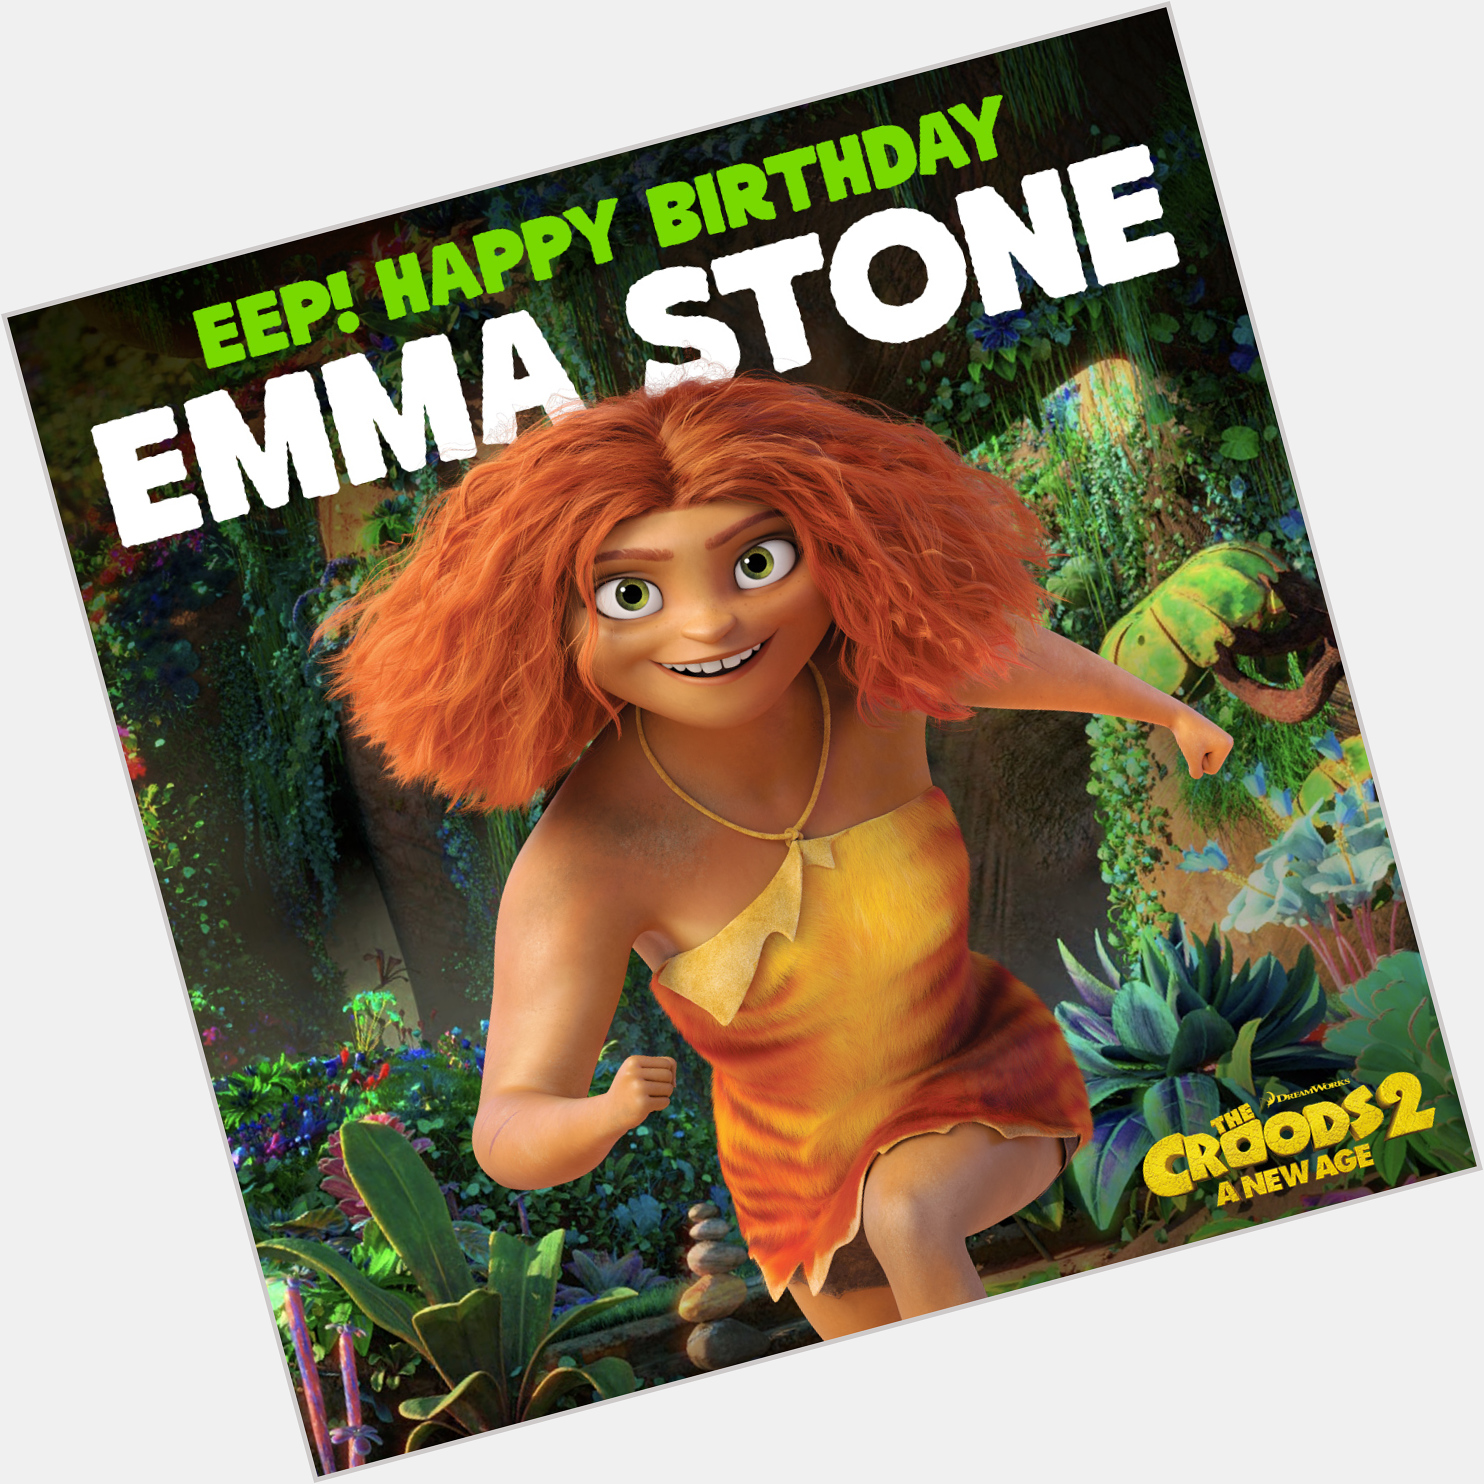 Happy Birthday Emma Stone! See her as the adventurous Eep in Coming soon! 